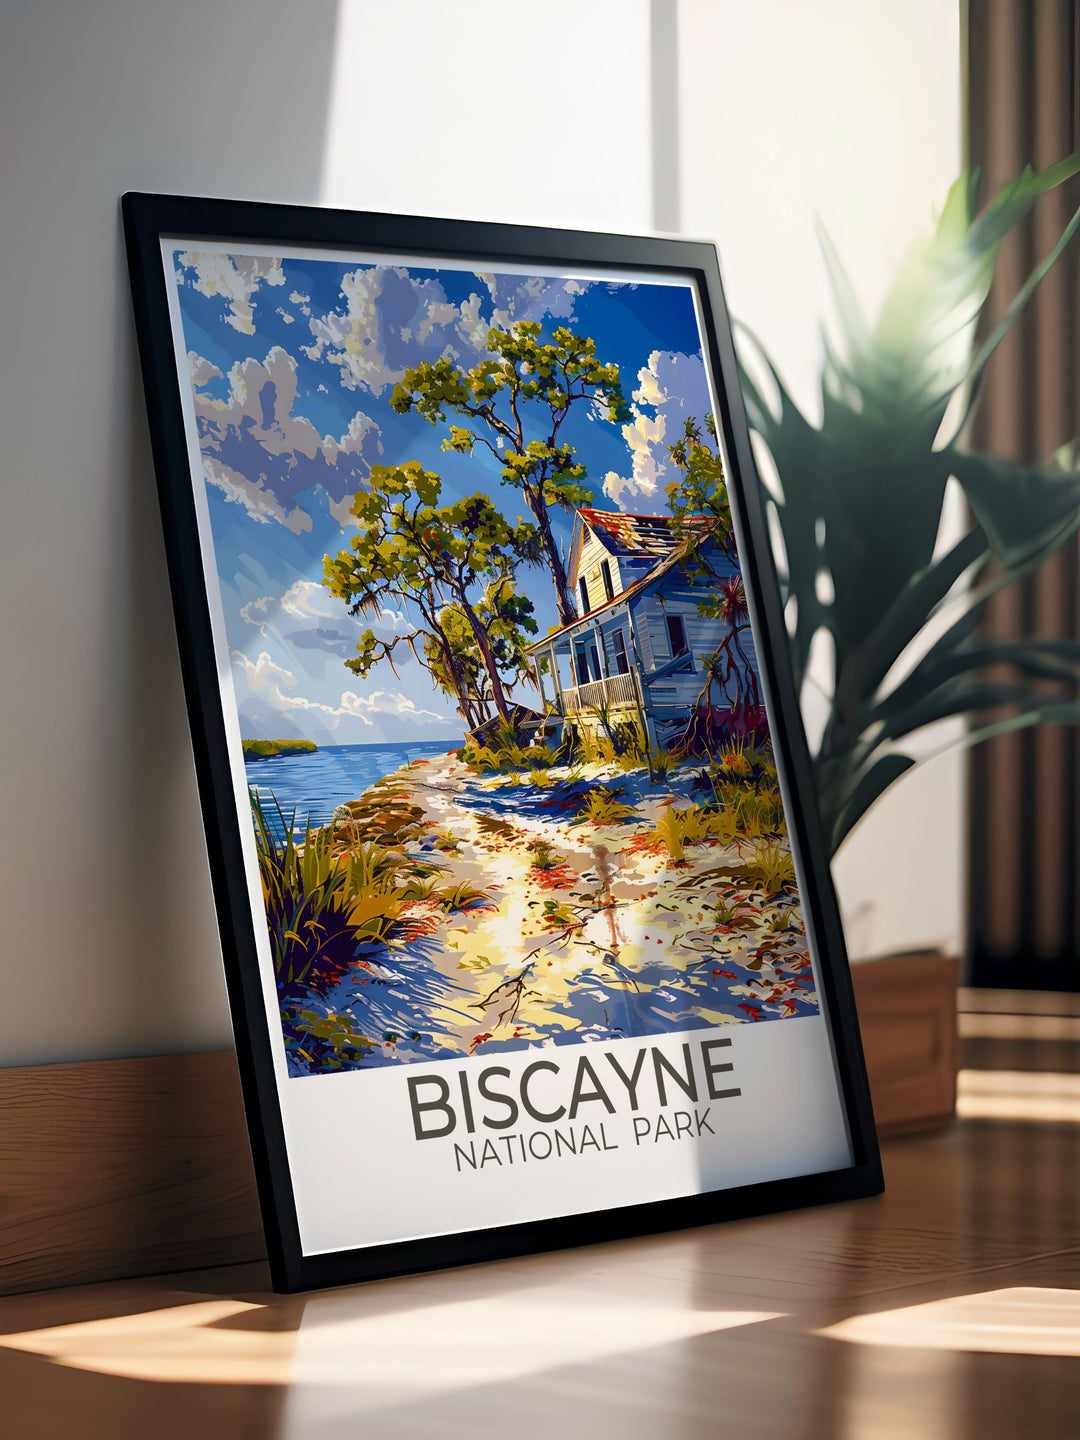 Beautiful Biscayne National Park travel poster capturing the scenic Maritime Heritage Trail and the underwater beauty of the coral reefs, perfect for enhancing your home or office with the parks iconic landmarks.